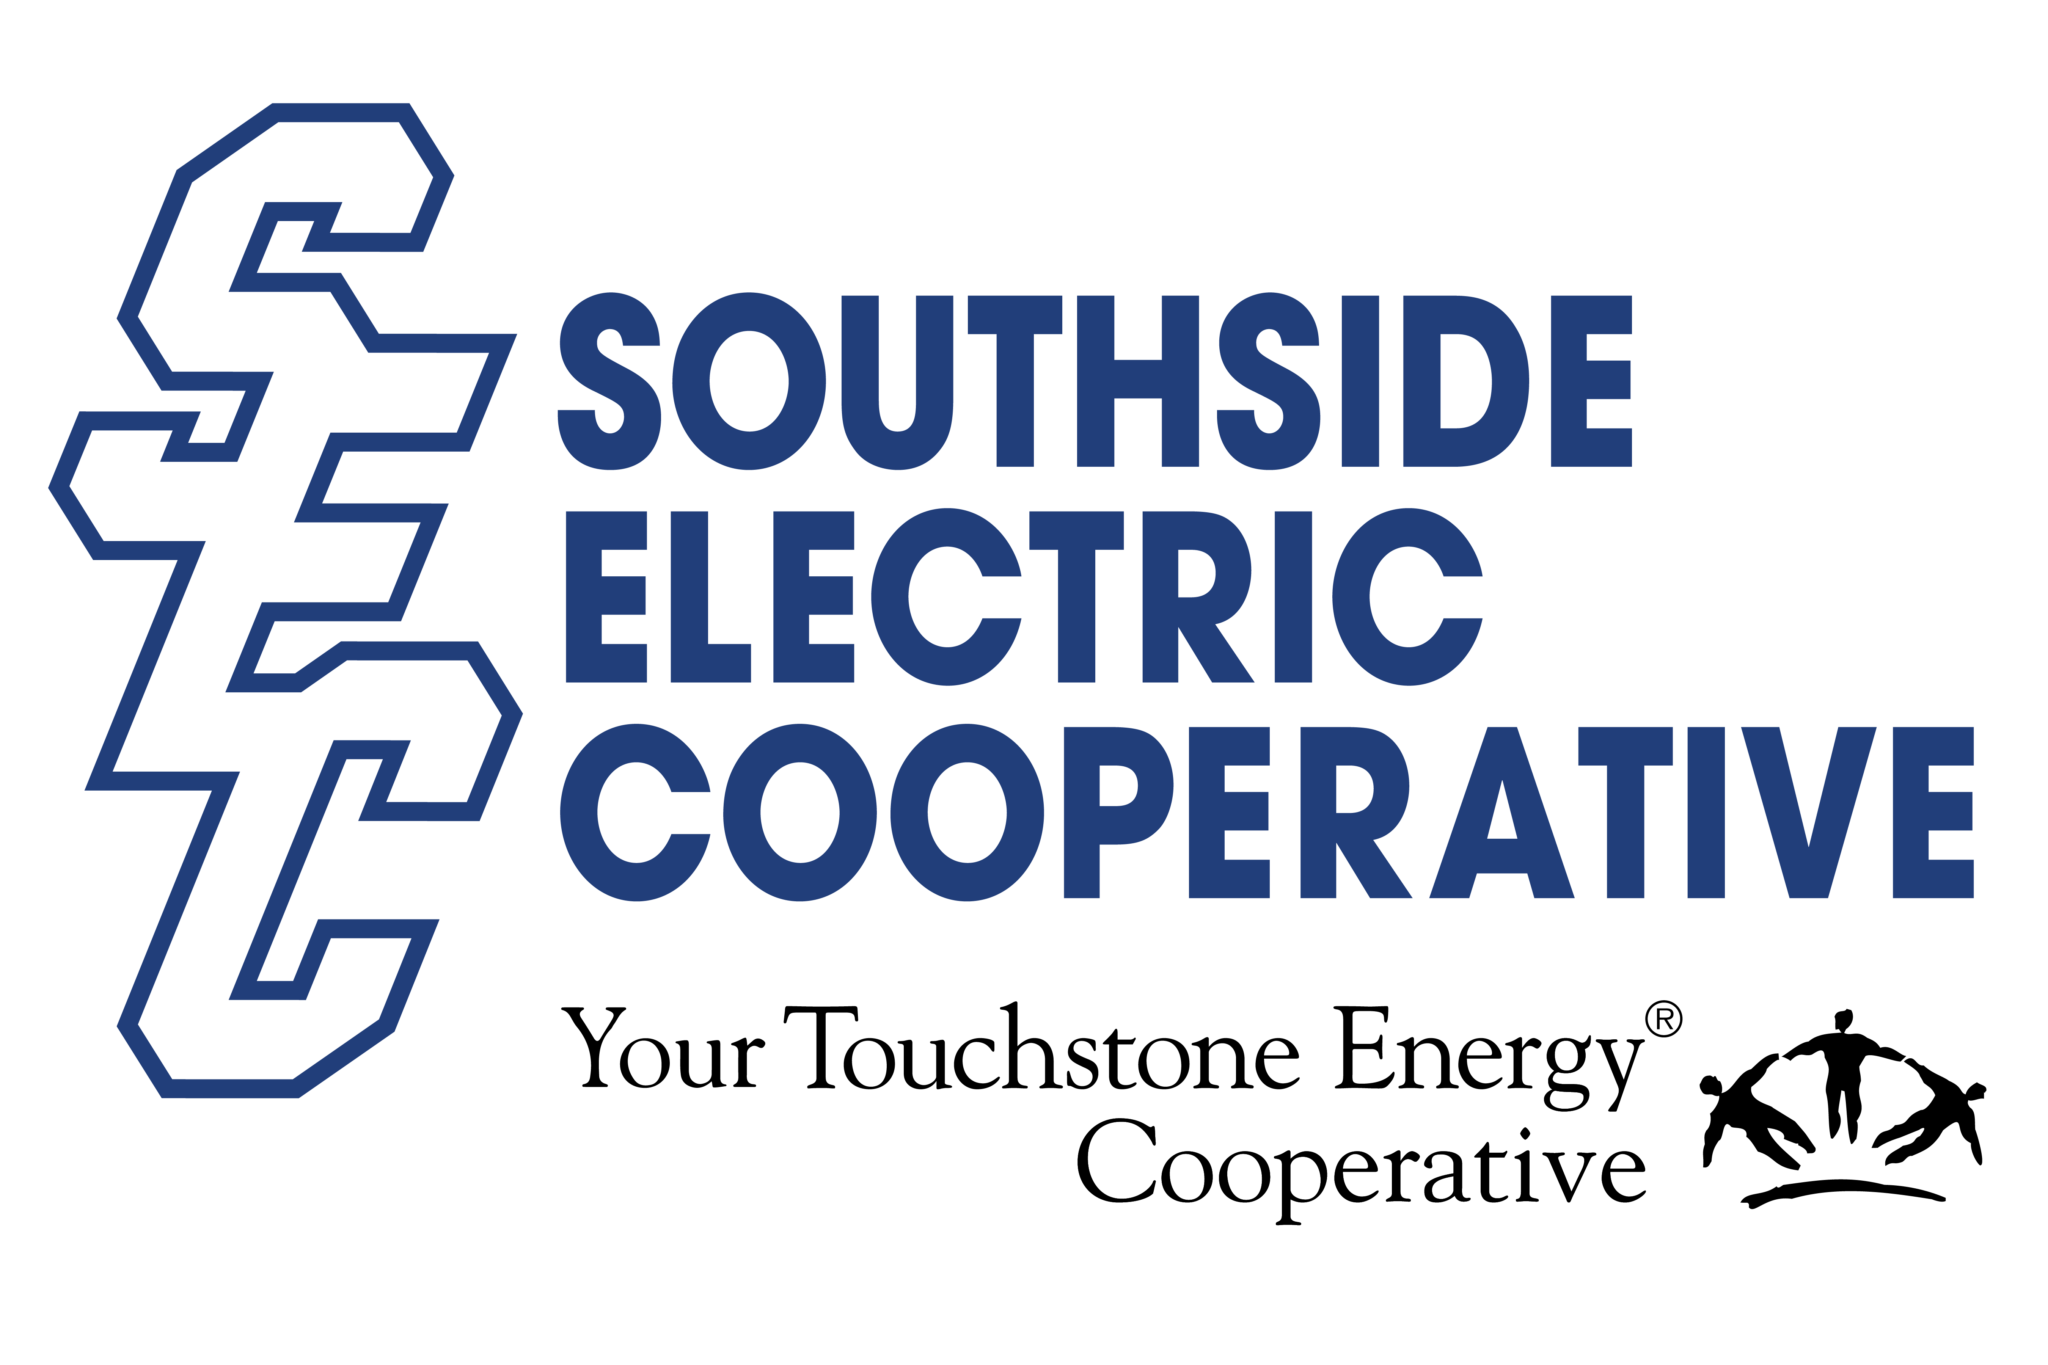 Southside Electric Cooperative logo